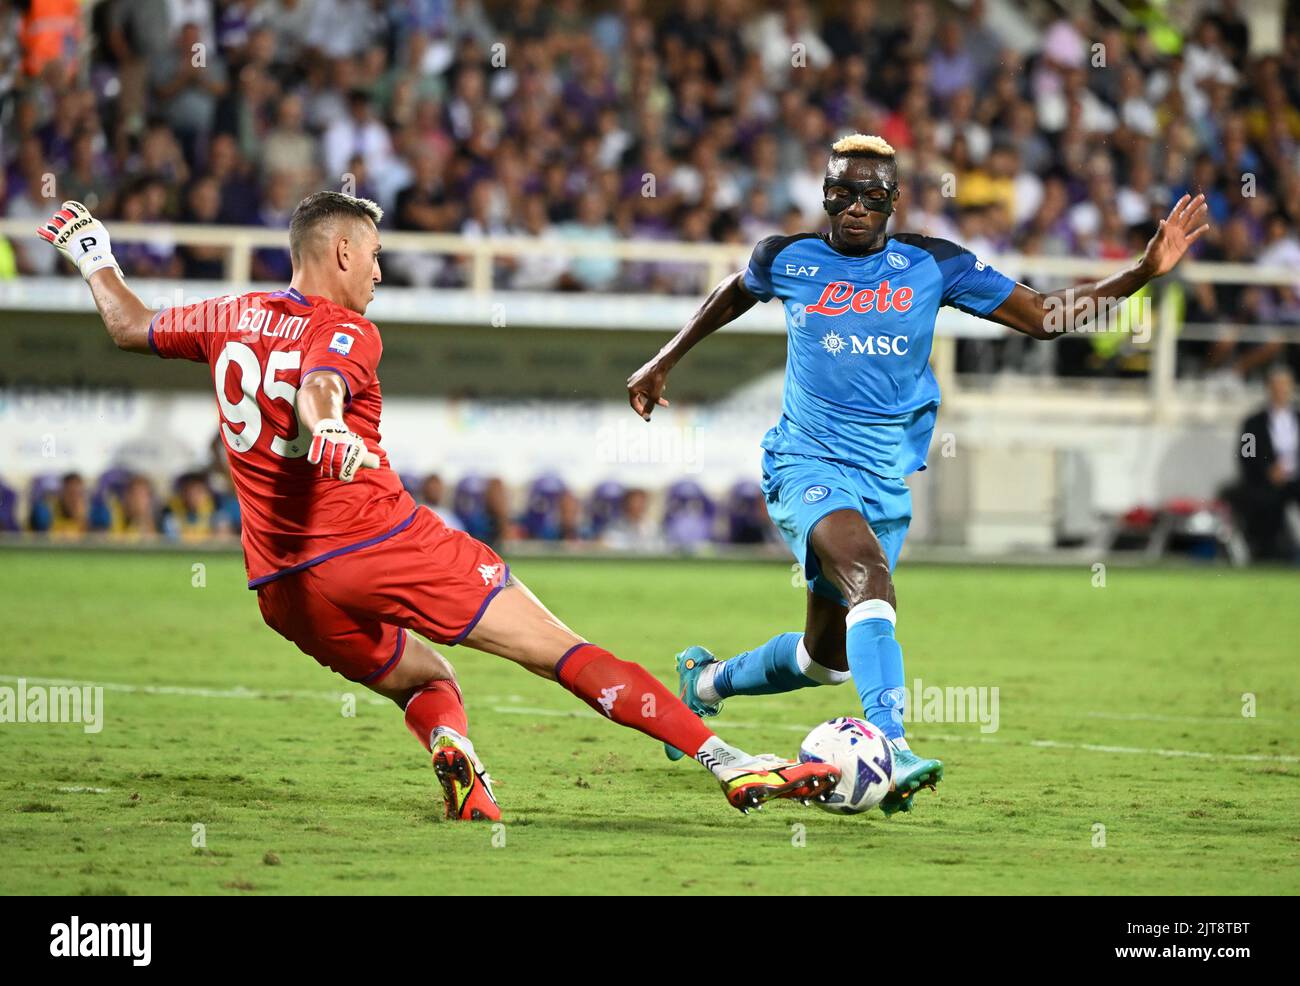 Florence, Italy. 28th Aug, 2022. Napoli's Victor Osimhen (R) vies with Fiorentina's goalkeeper Pierluigi Gollini during a Serie A football match between Fiorentina and Napoli in Florence, Italy, Aug. 28, 2022. Credit: Alberto Lingria/Xinhua/Alamy Live News Stock Photo